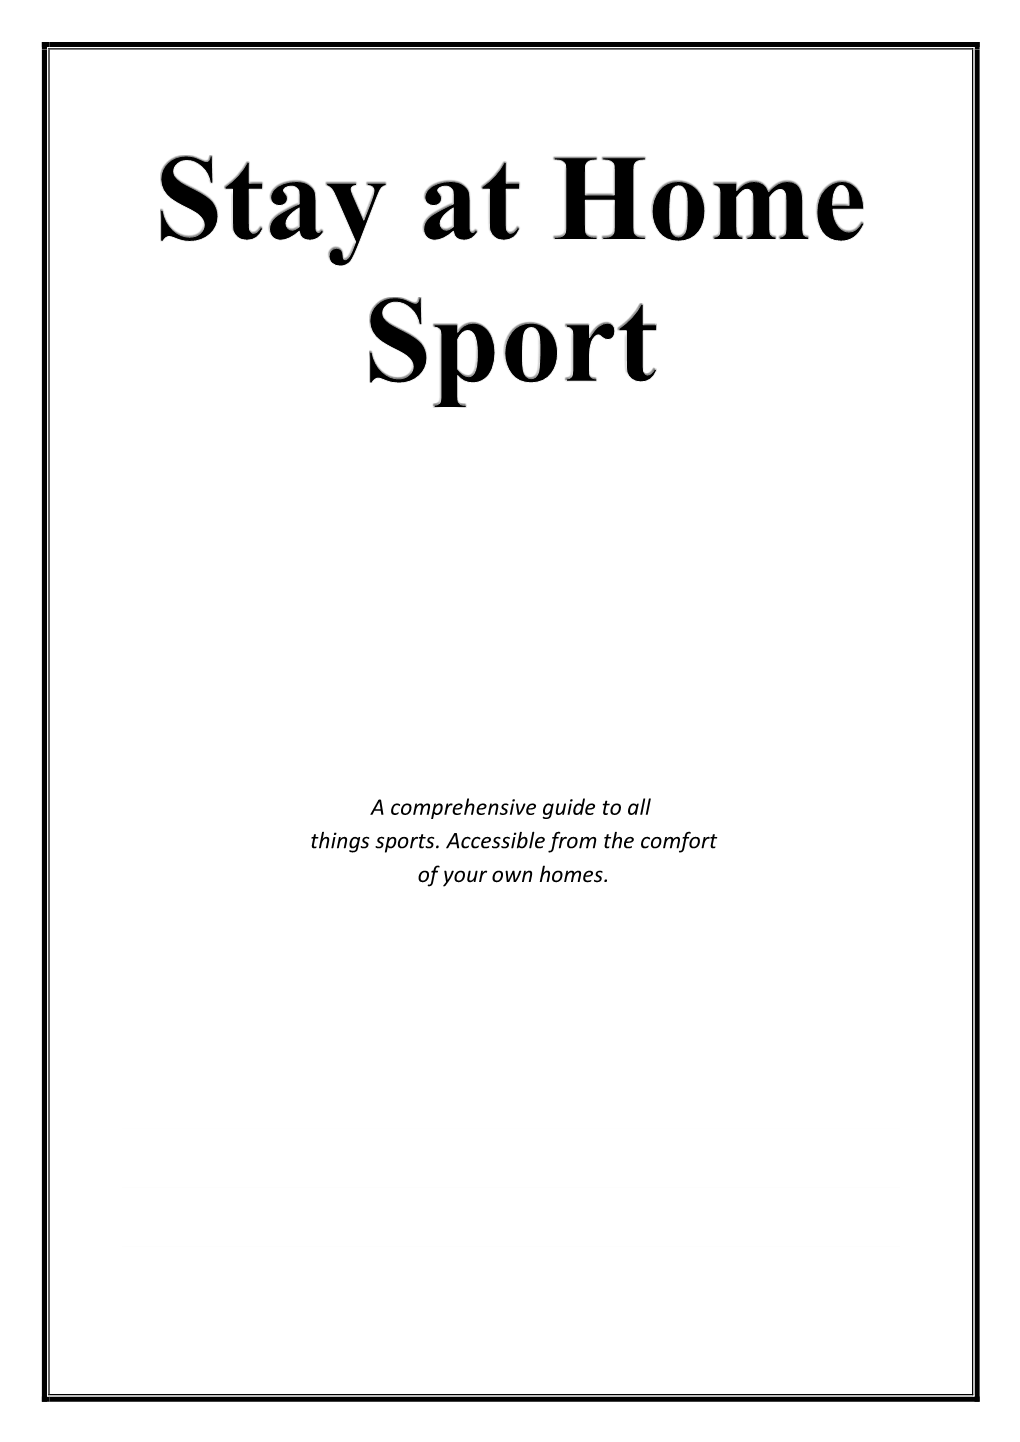 A Comprehensive Guide to All Things Sports. Accessible from the Comfort of Your Own Homes